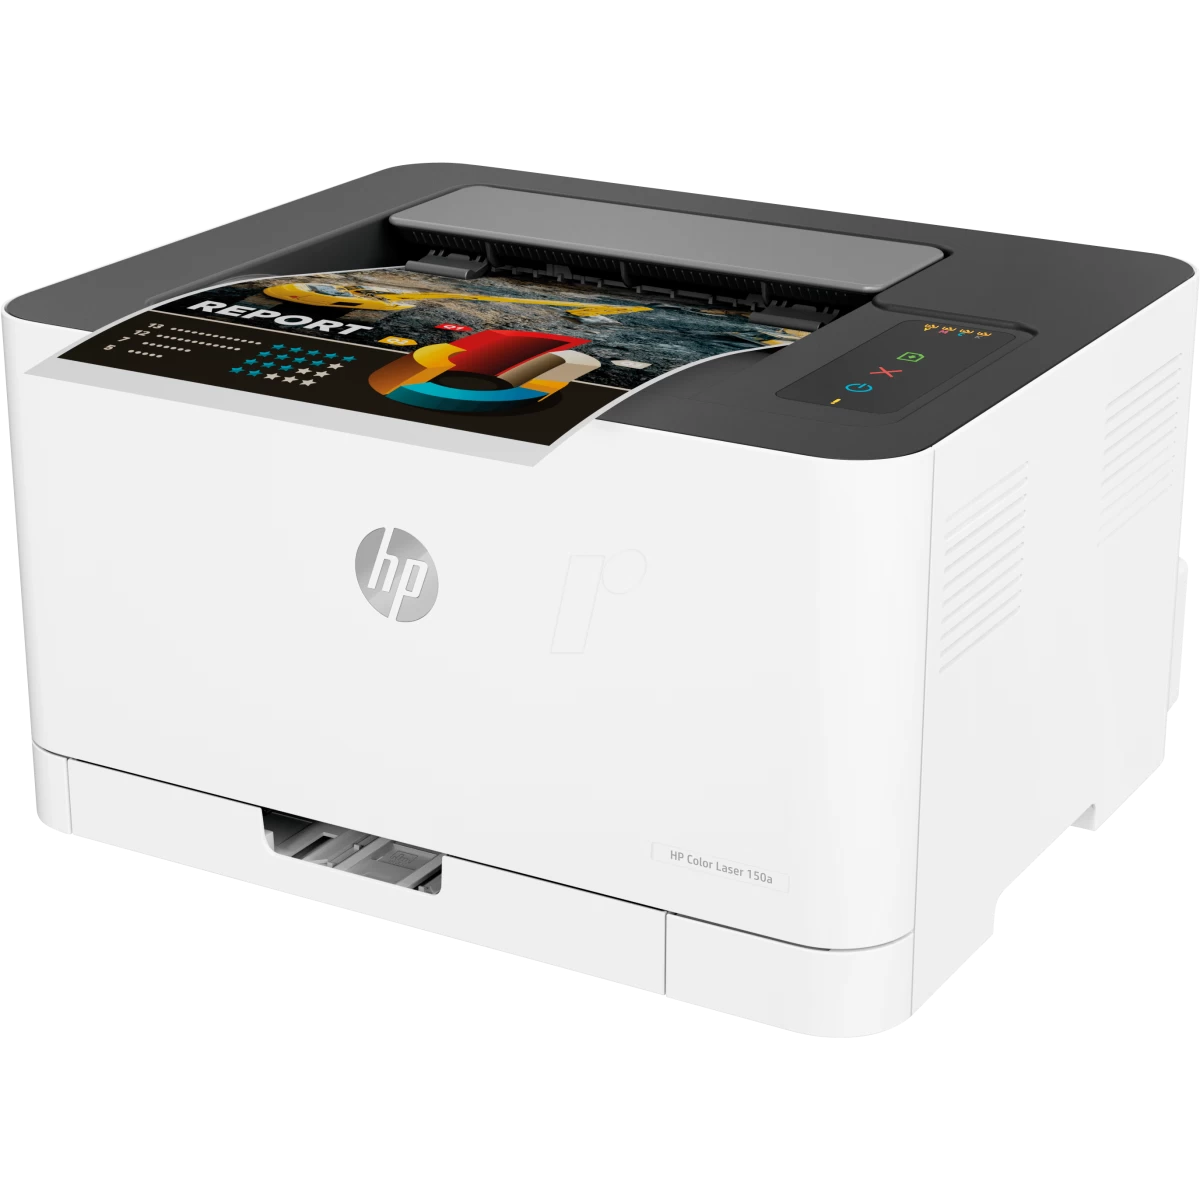 HP Color Laser 150a A4 Color Laser Printer – Future For Office Supplies & Computer